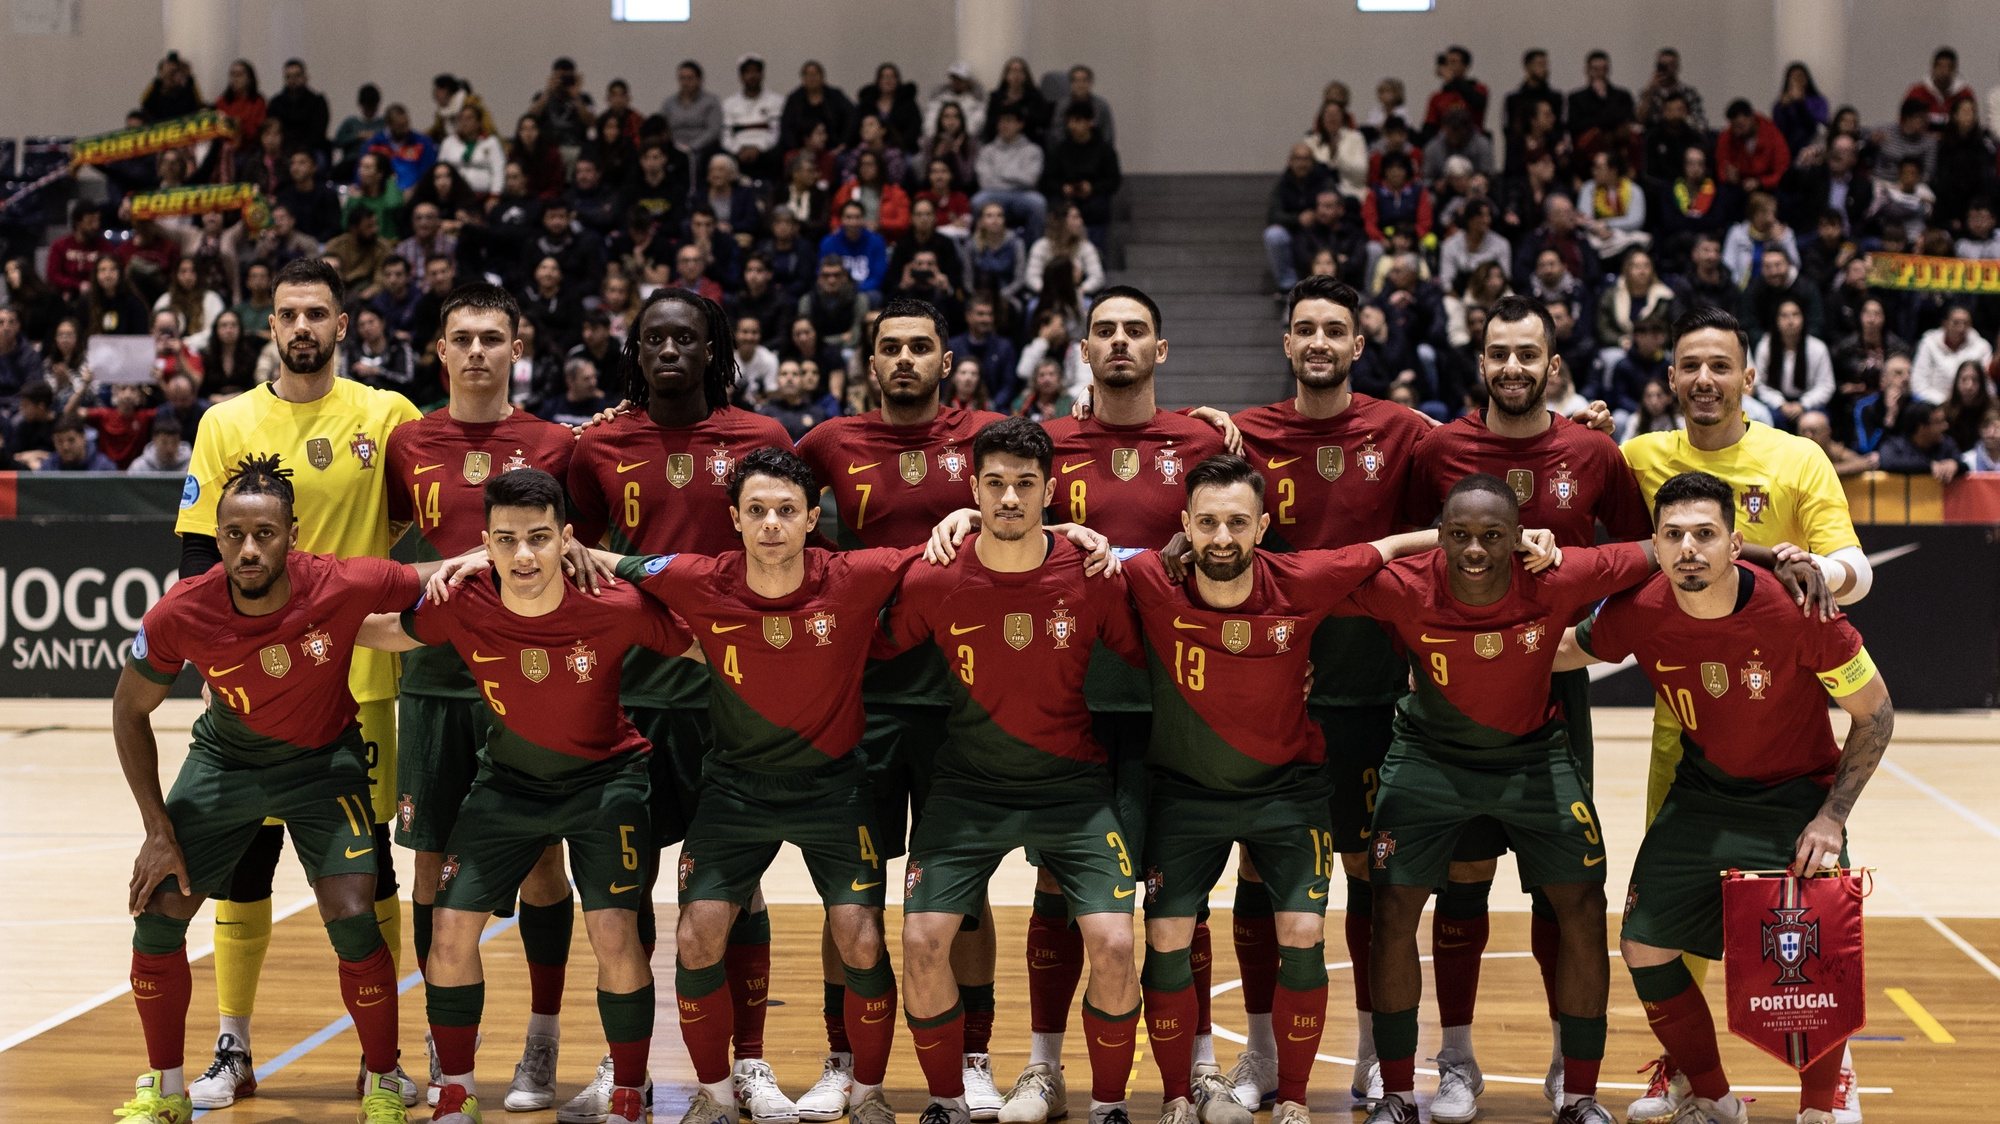 Portugal players line up for a photocall during a friendly futsal match against Italy ahead of Futsal World Cup 2024 preparation, at Vila do Conde Pavillion, Porto, Portugal, 14 April 2023. JOSE COELHO/LUSA